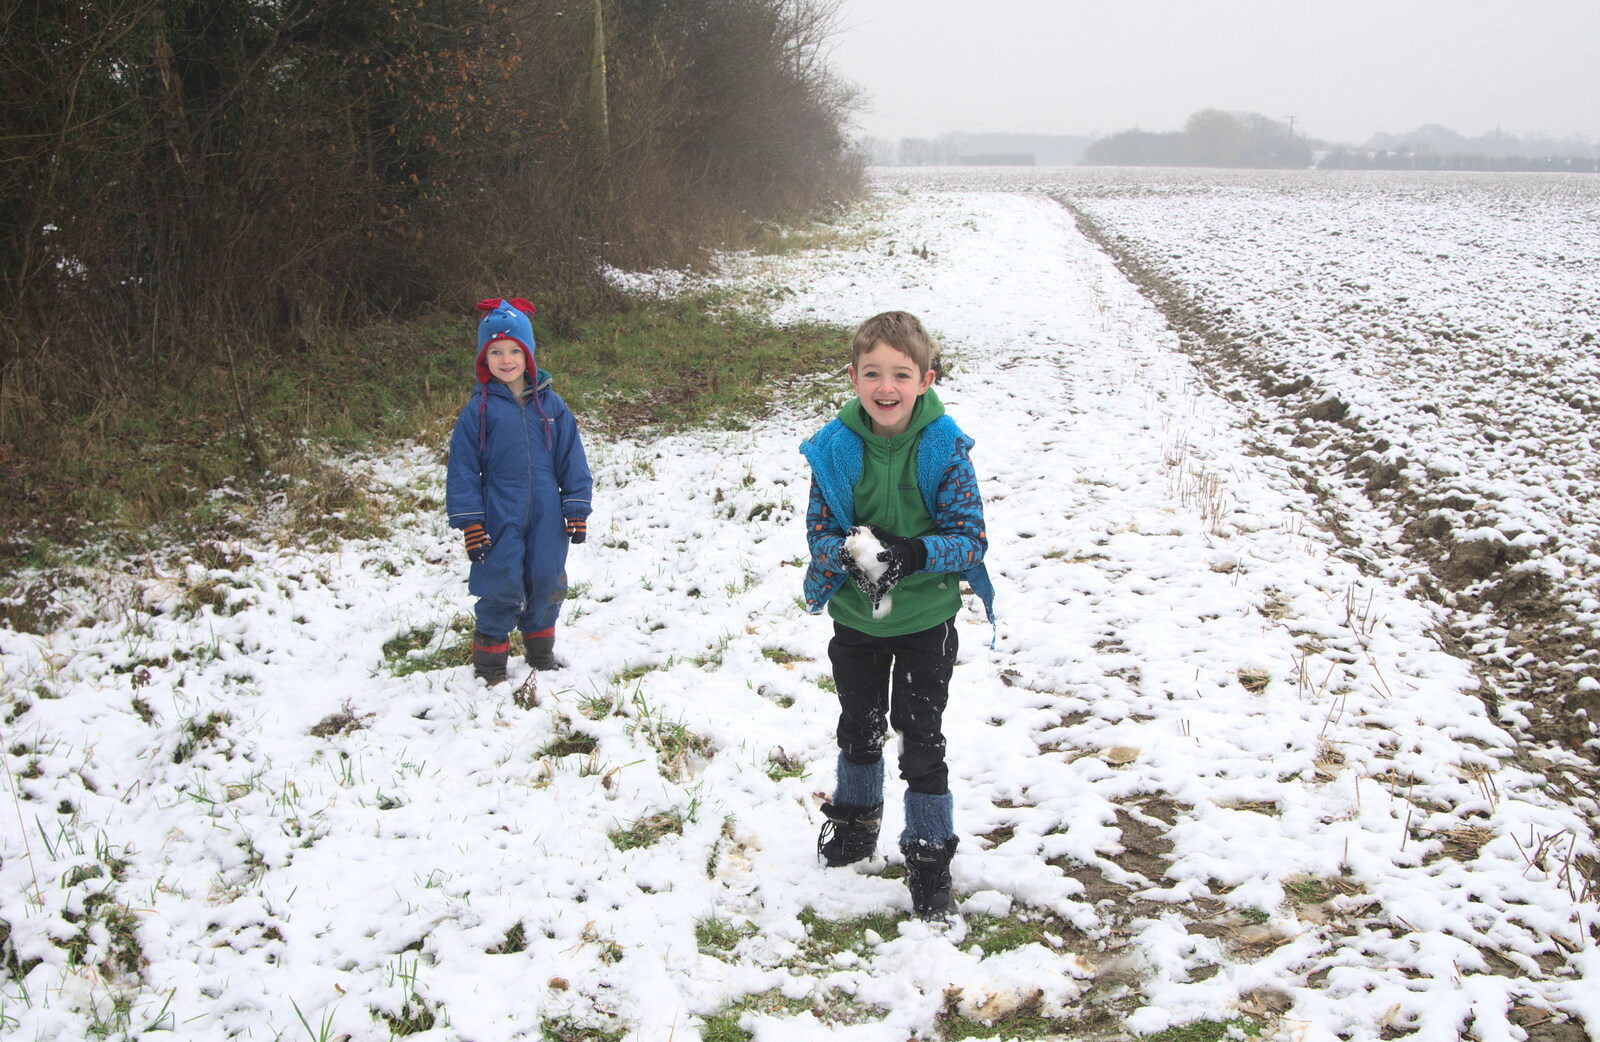 A snowball fight breaks out from A Snowy Day, Brome, Suffolk - 12th February 2017